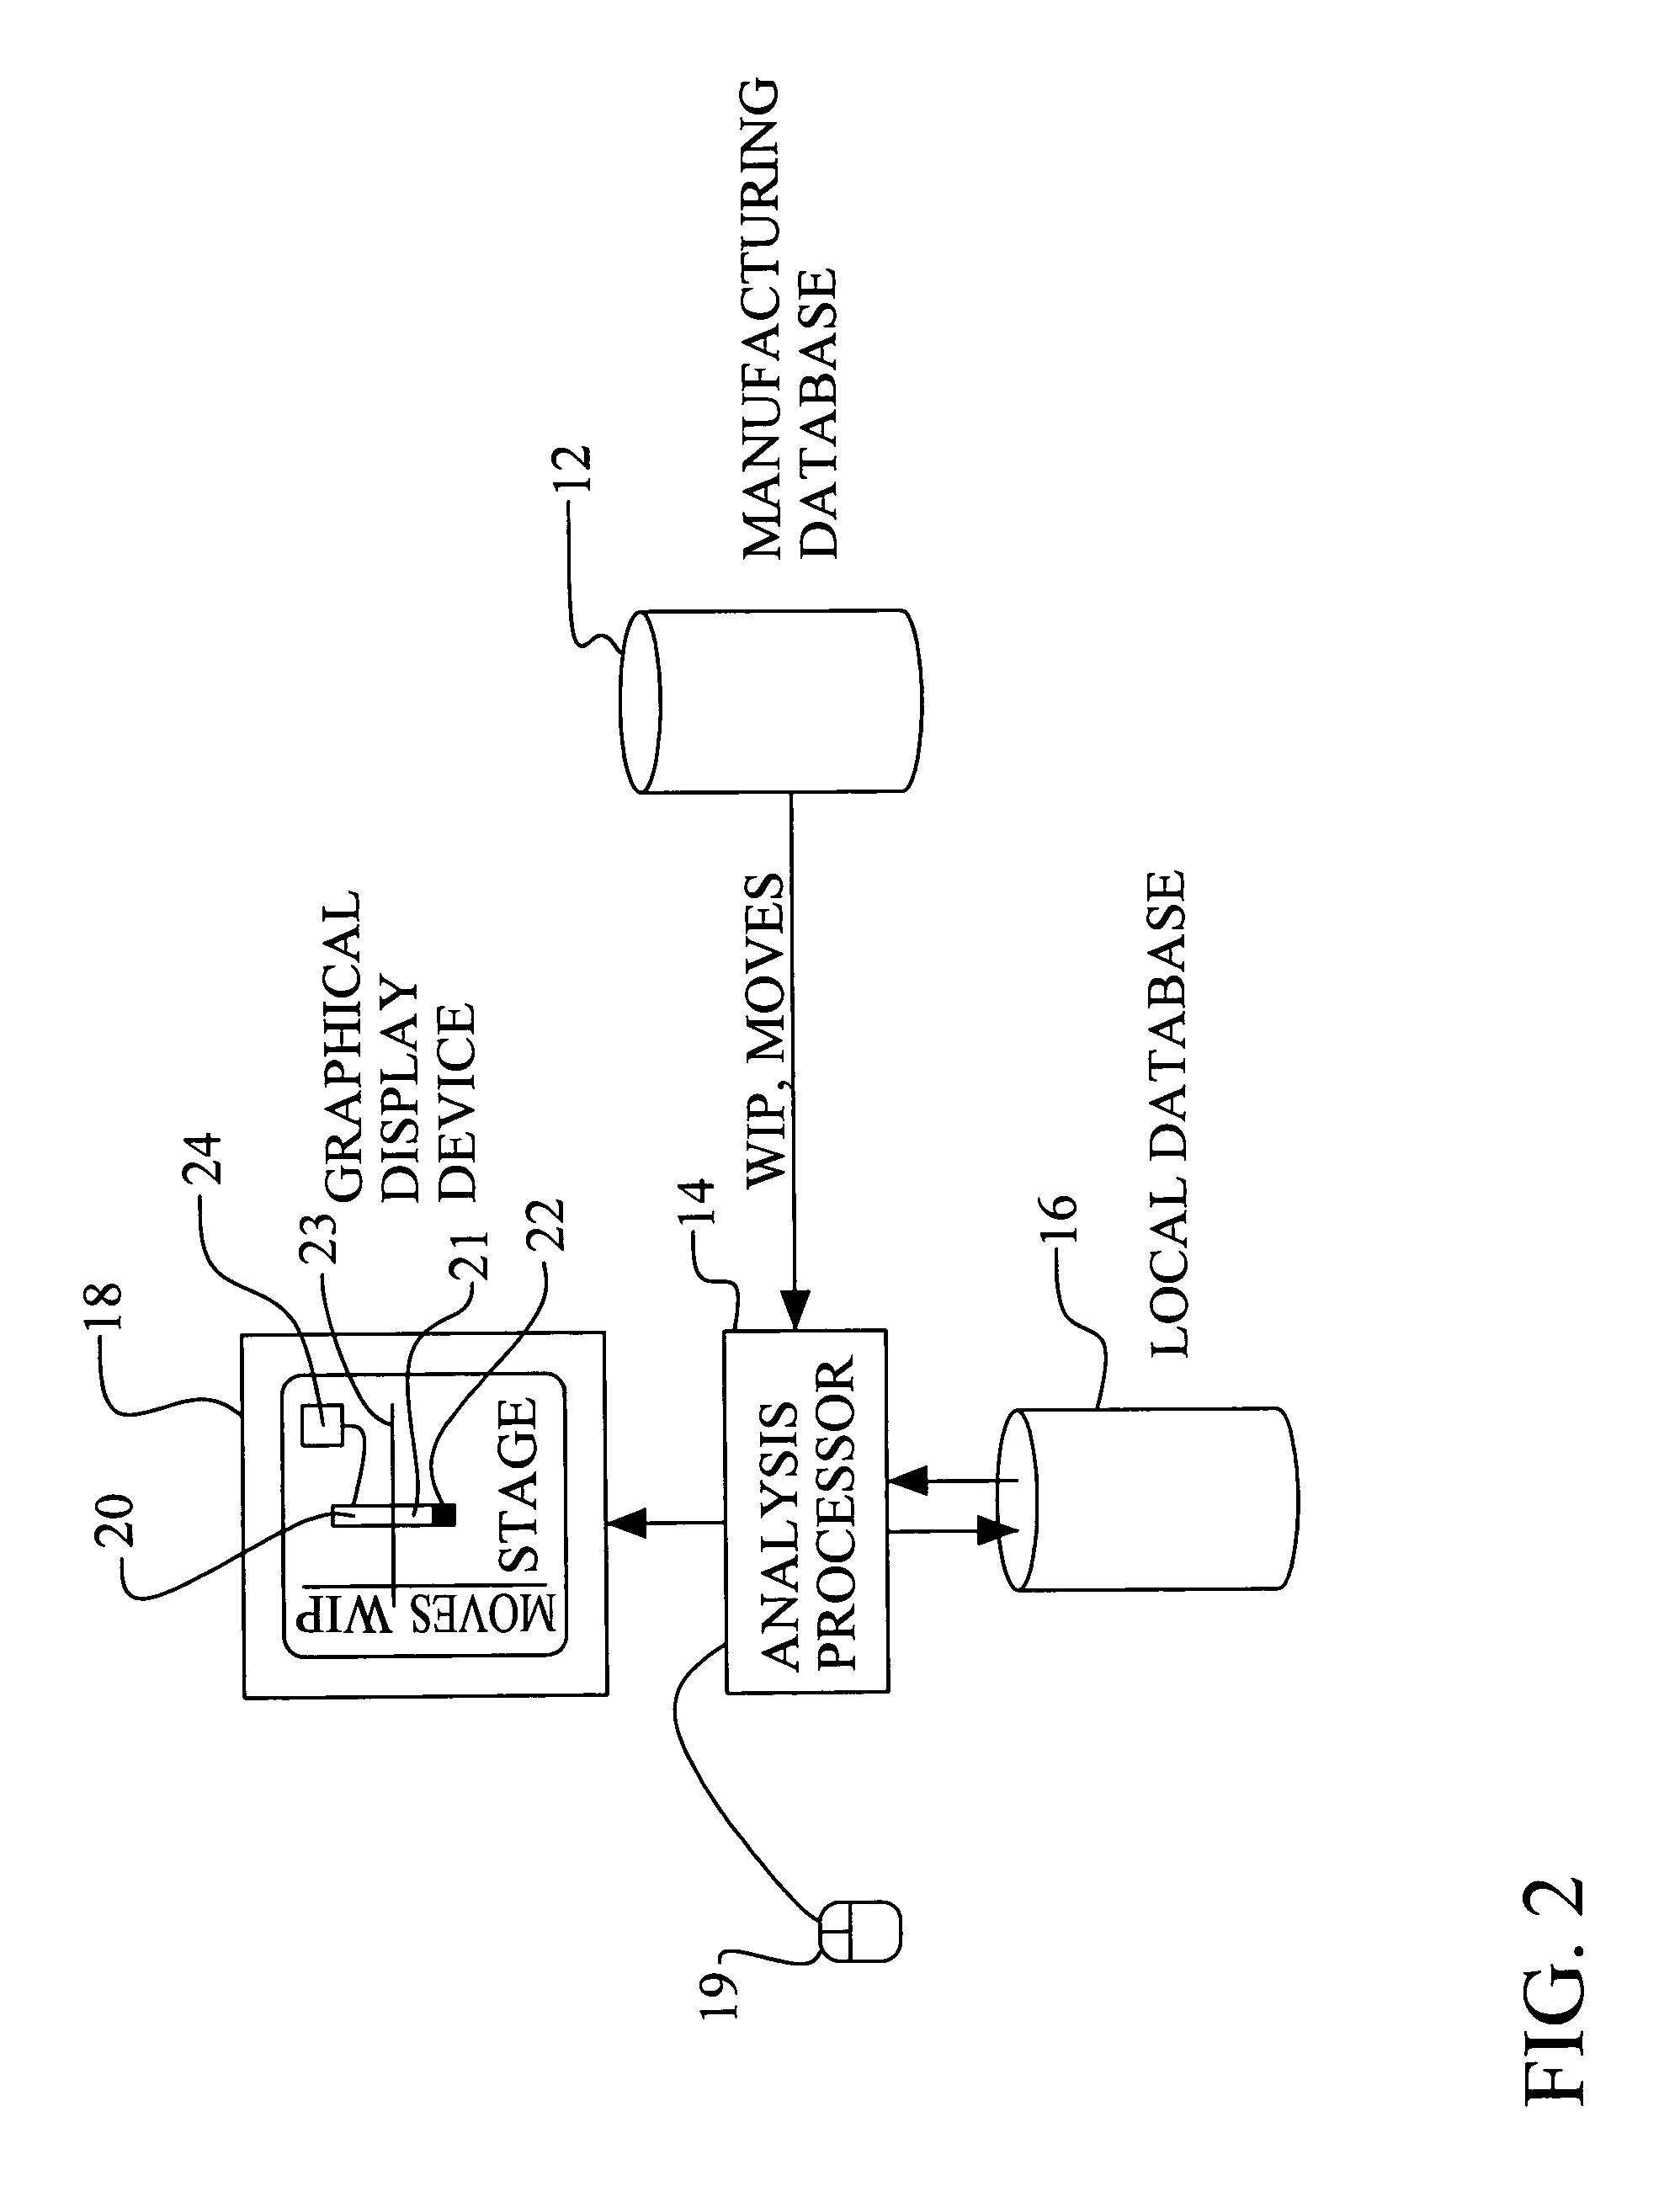 Method and apparatus for displaying production data for improved manufacturing decision making